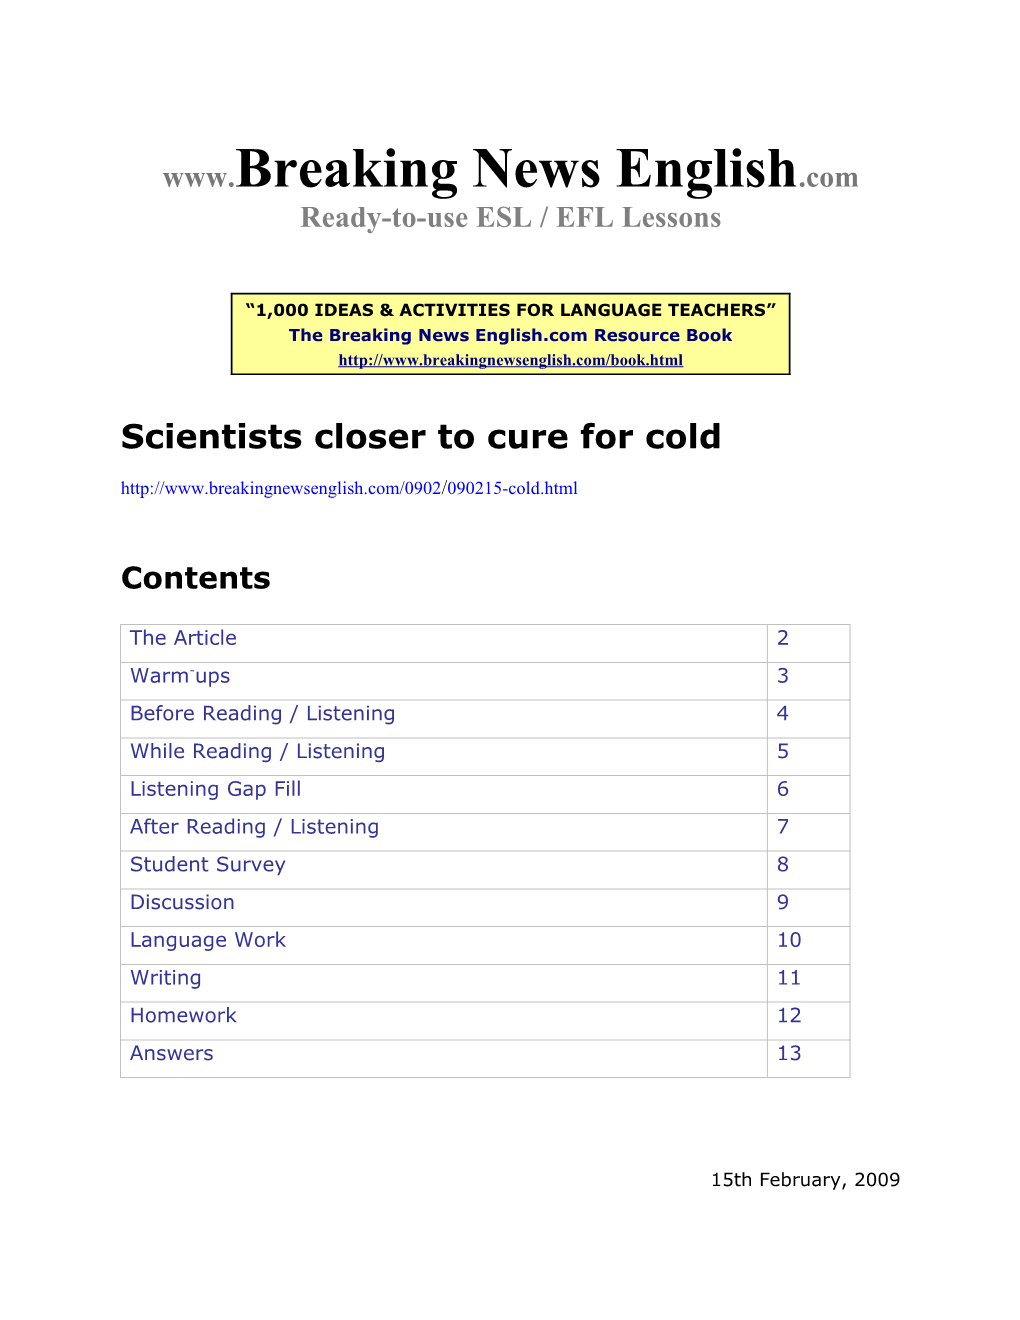 ESL Lesson: Scientists Closer to Cure for Cold